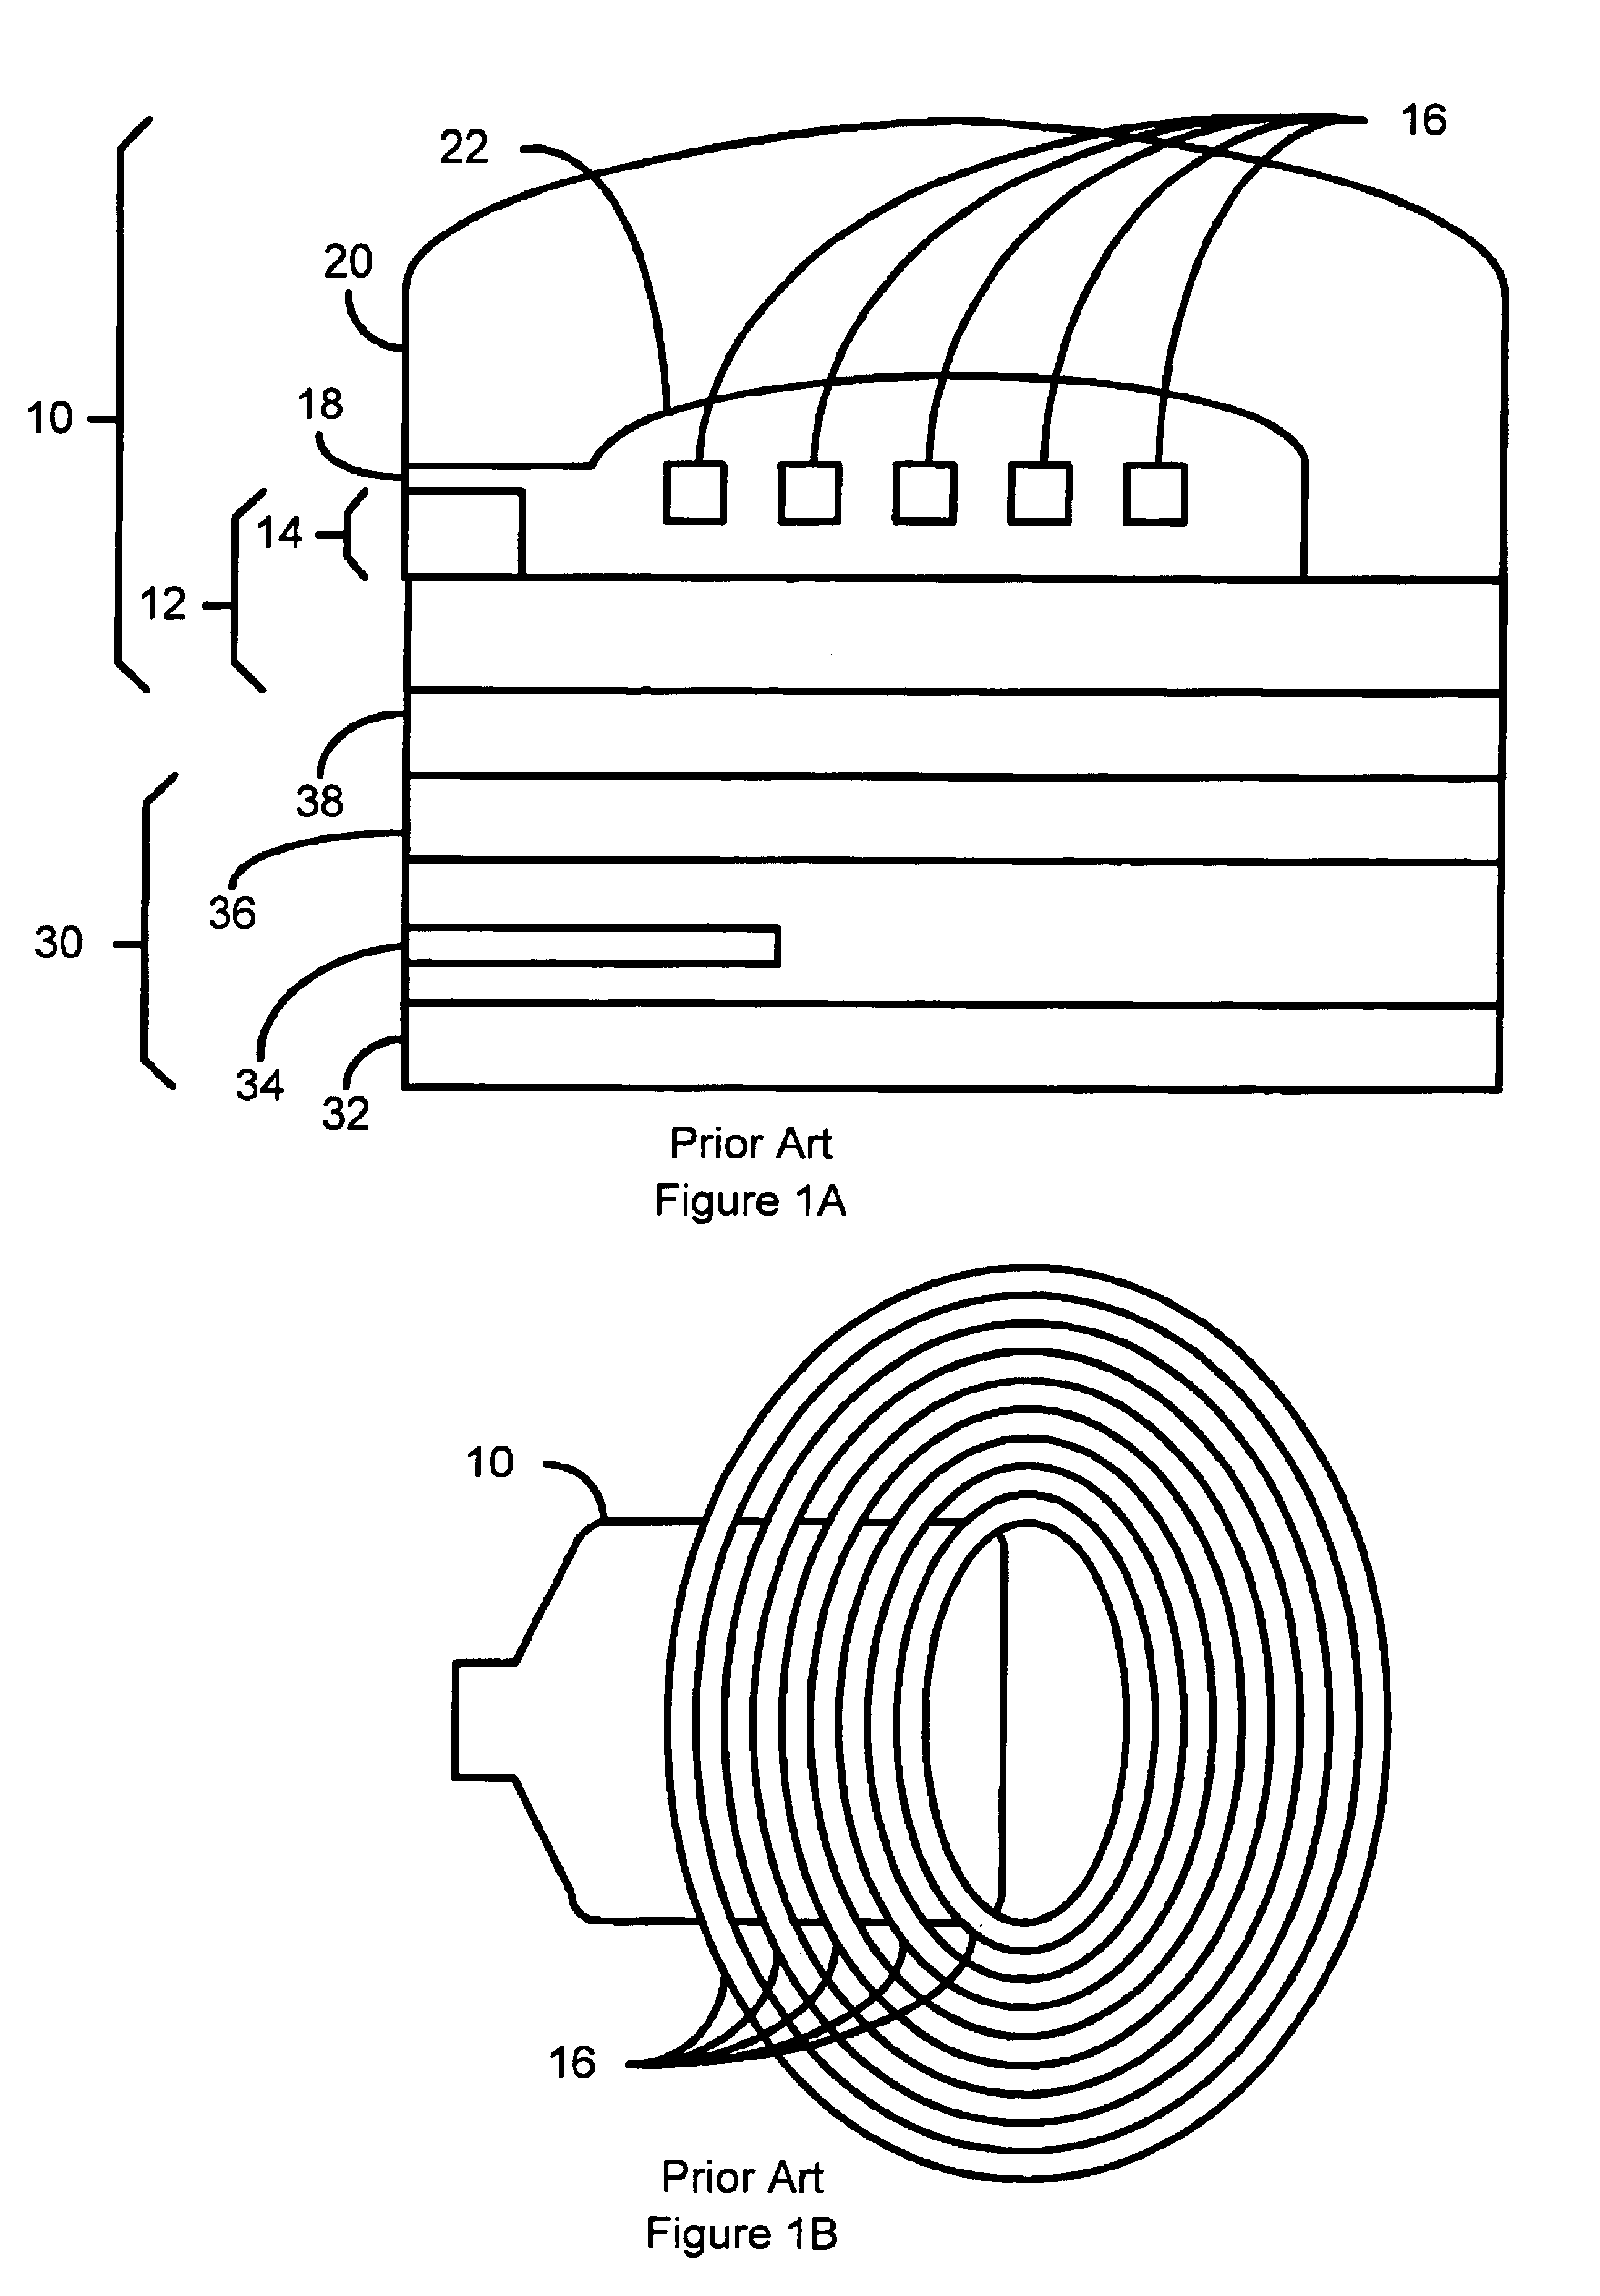 Method and system for reducing thermal pole tip protrusion